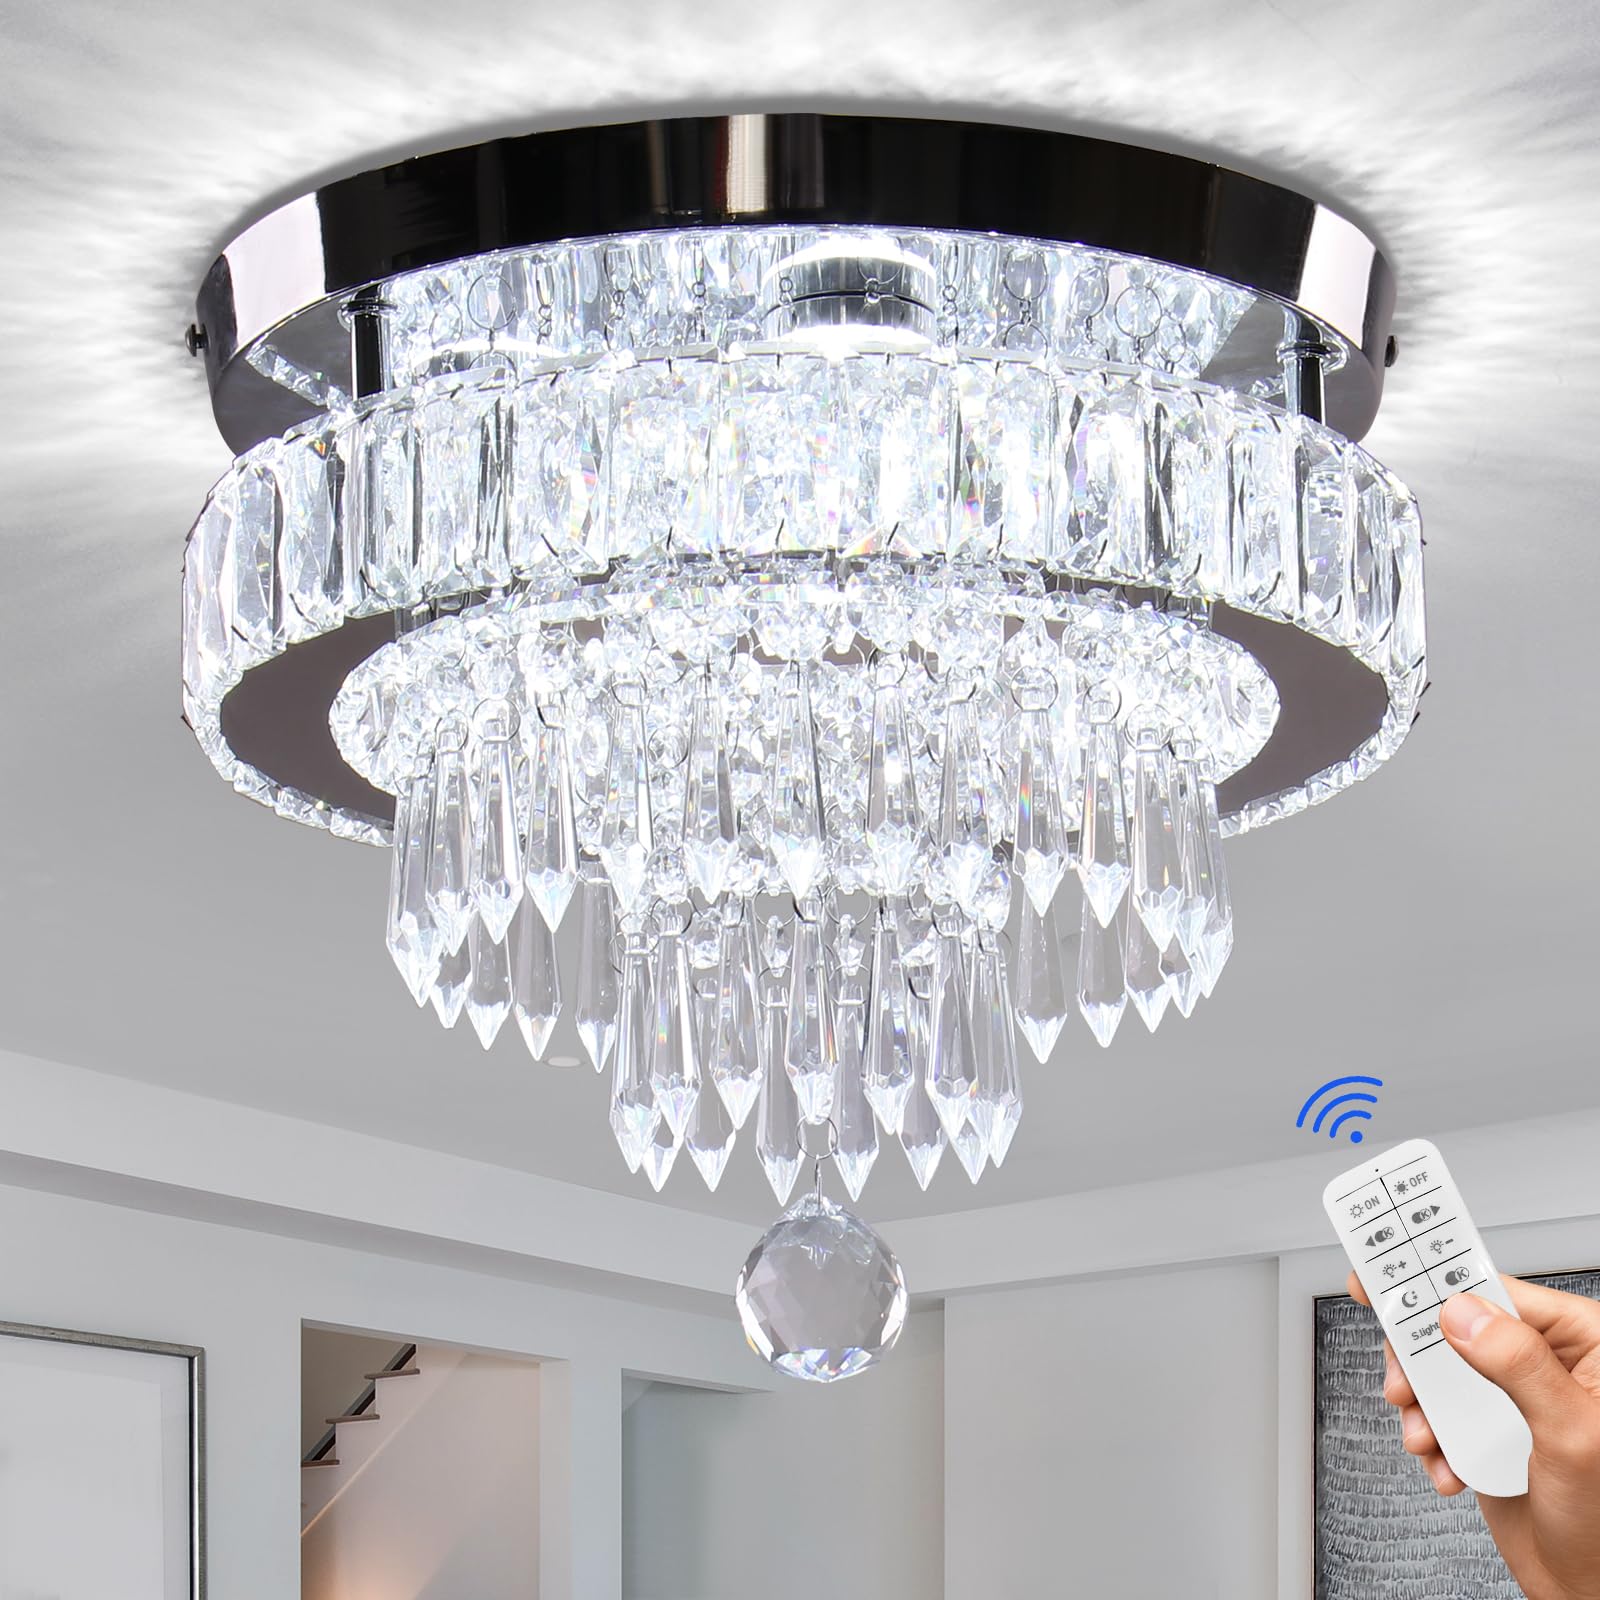 Finktonglan 11.8" Dimmable Crystal Chandelier LED Modern Crystal Ceiling Light, Flush Mount Crystal Chandeliers, 3 Light Colors Adjustable with Remote Control for Bedrooms Living Room Hallway